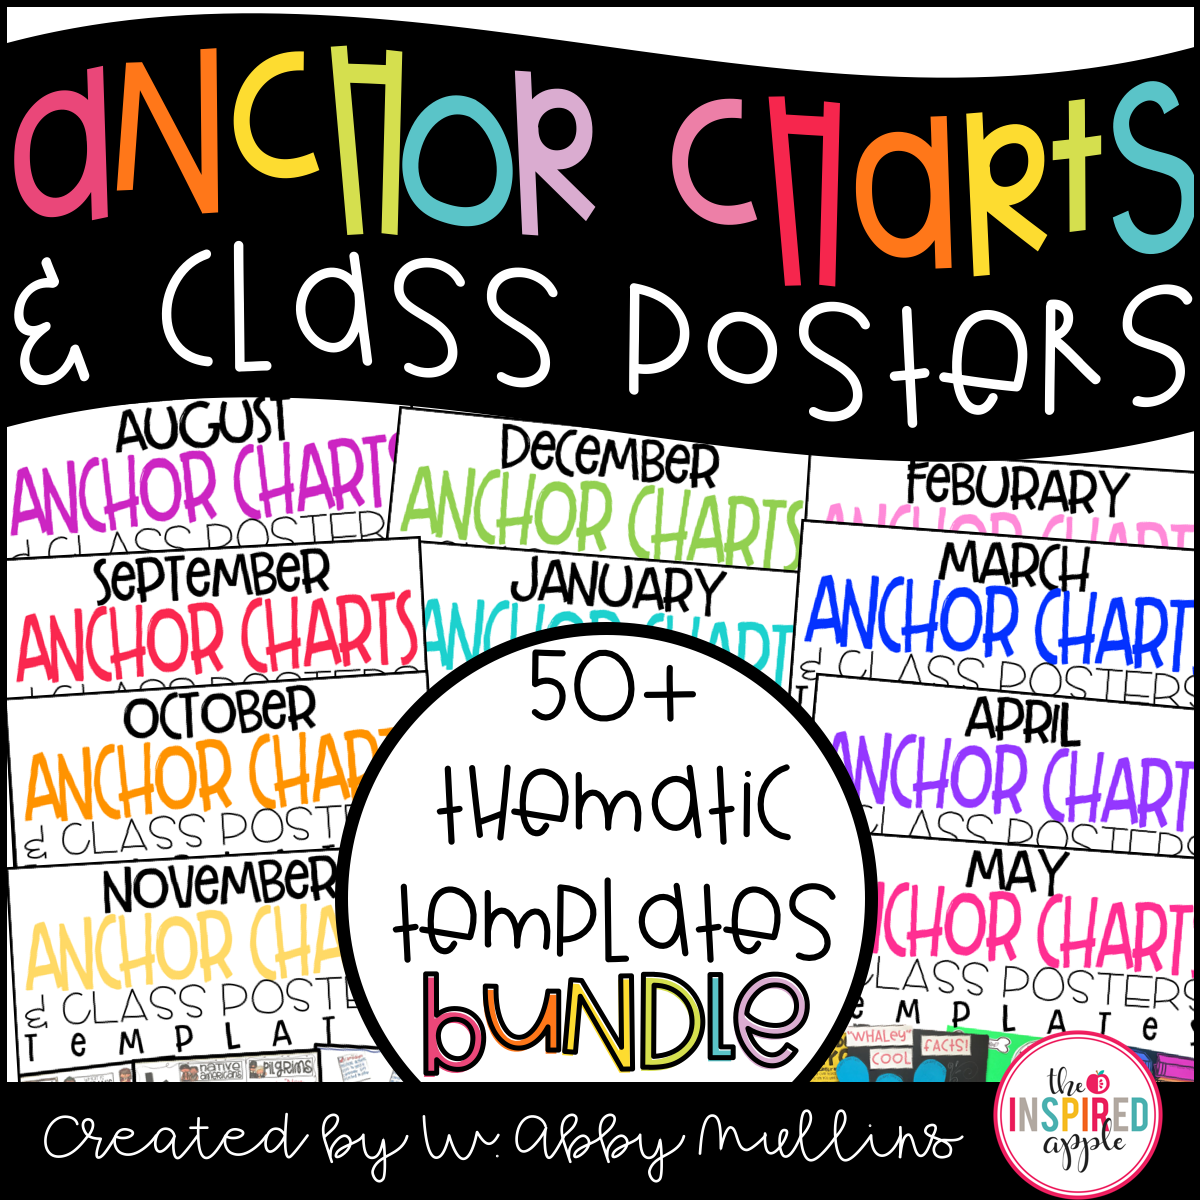 https://www.teacherspayteachers.com/Product/Back-to-School-Anchor-Charts-and-Class-Posters-3217422